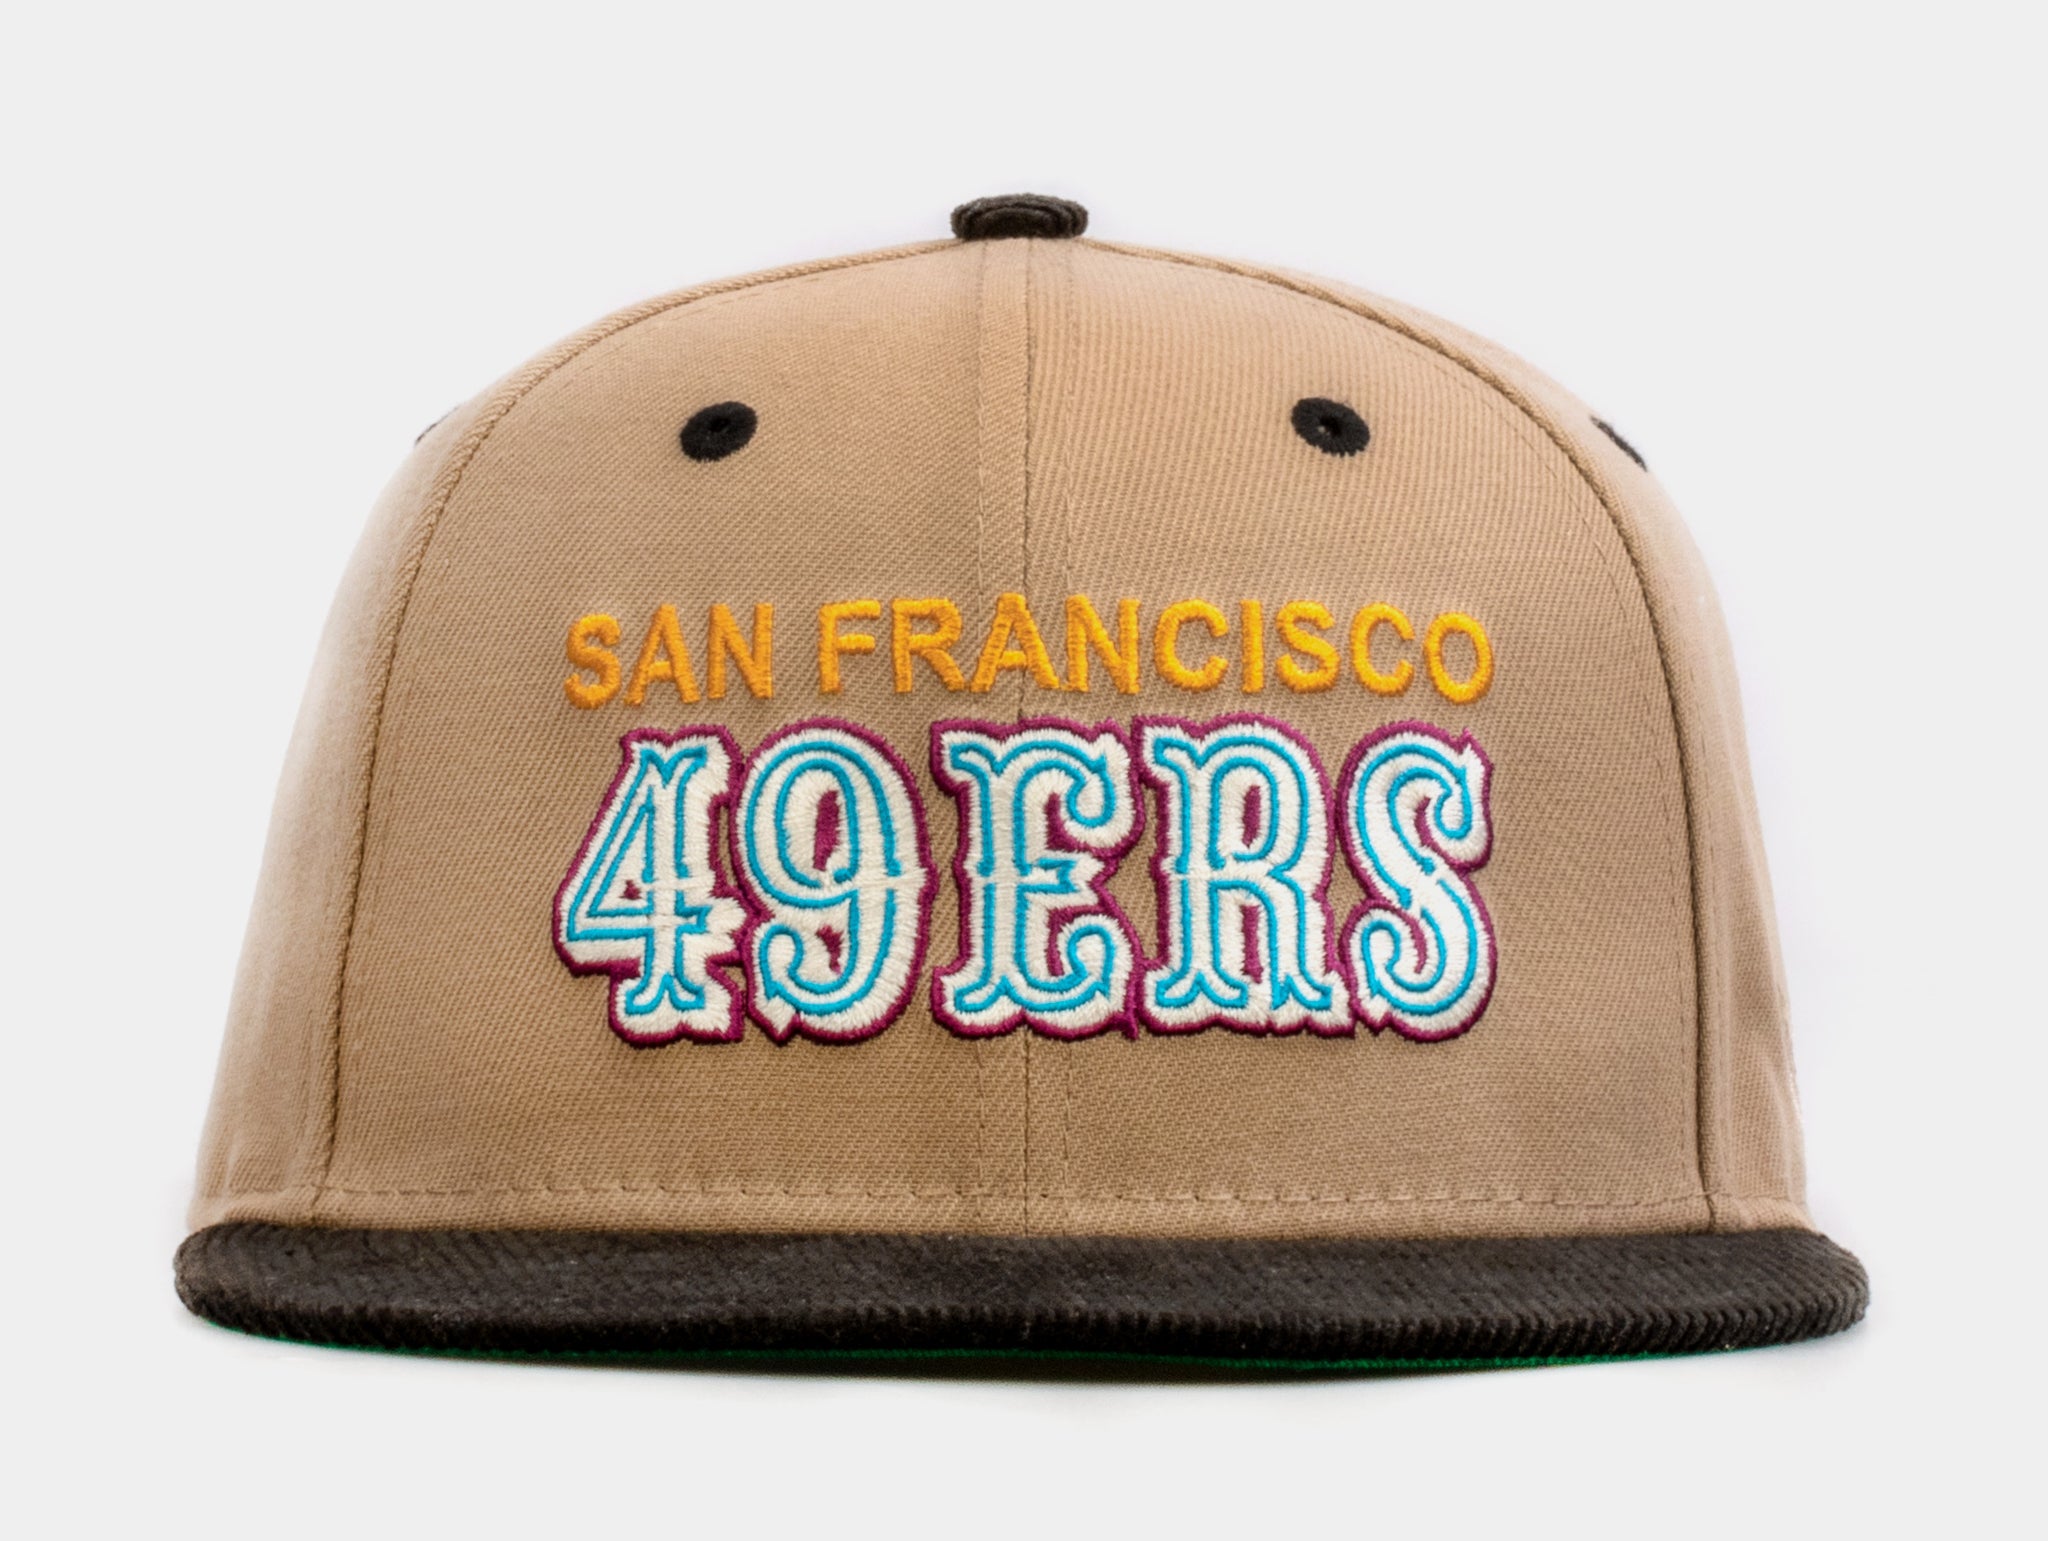 new era 49ers fitted hats